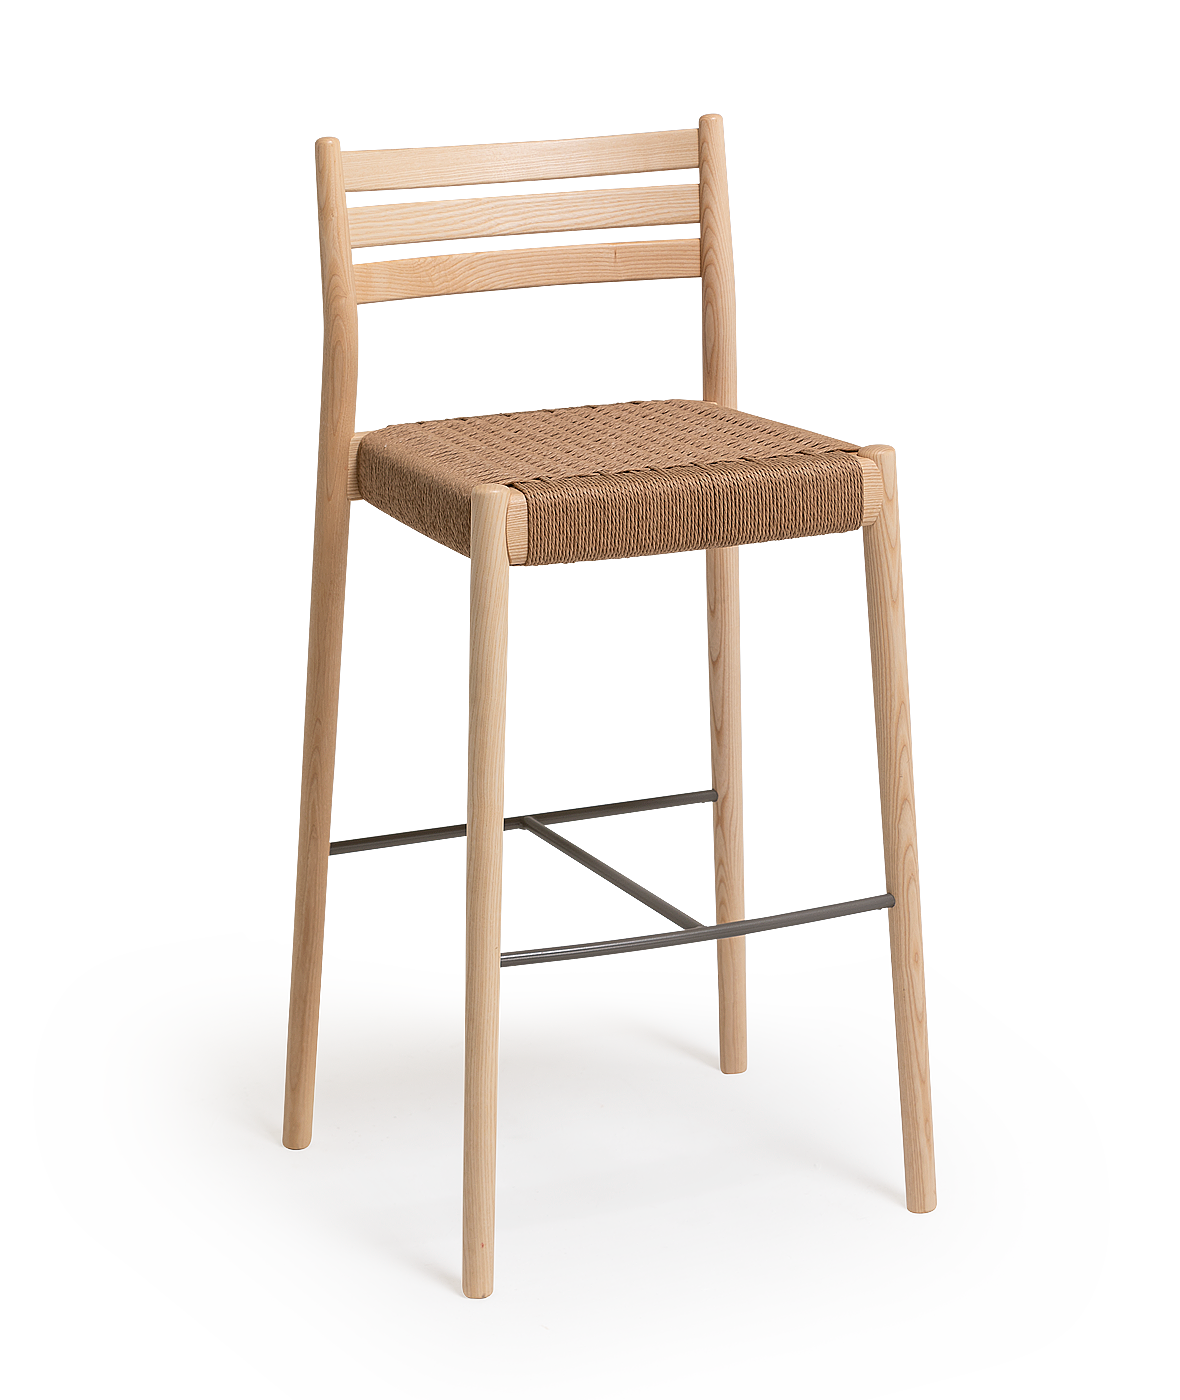 Bogart Stool with backrest and braided rope seat - Vergés